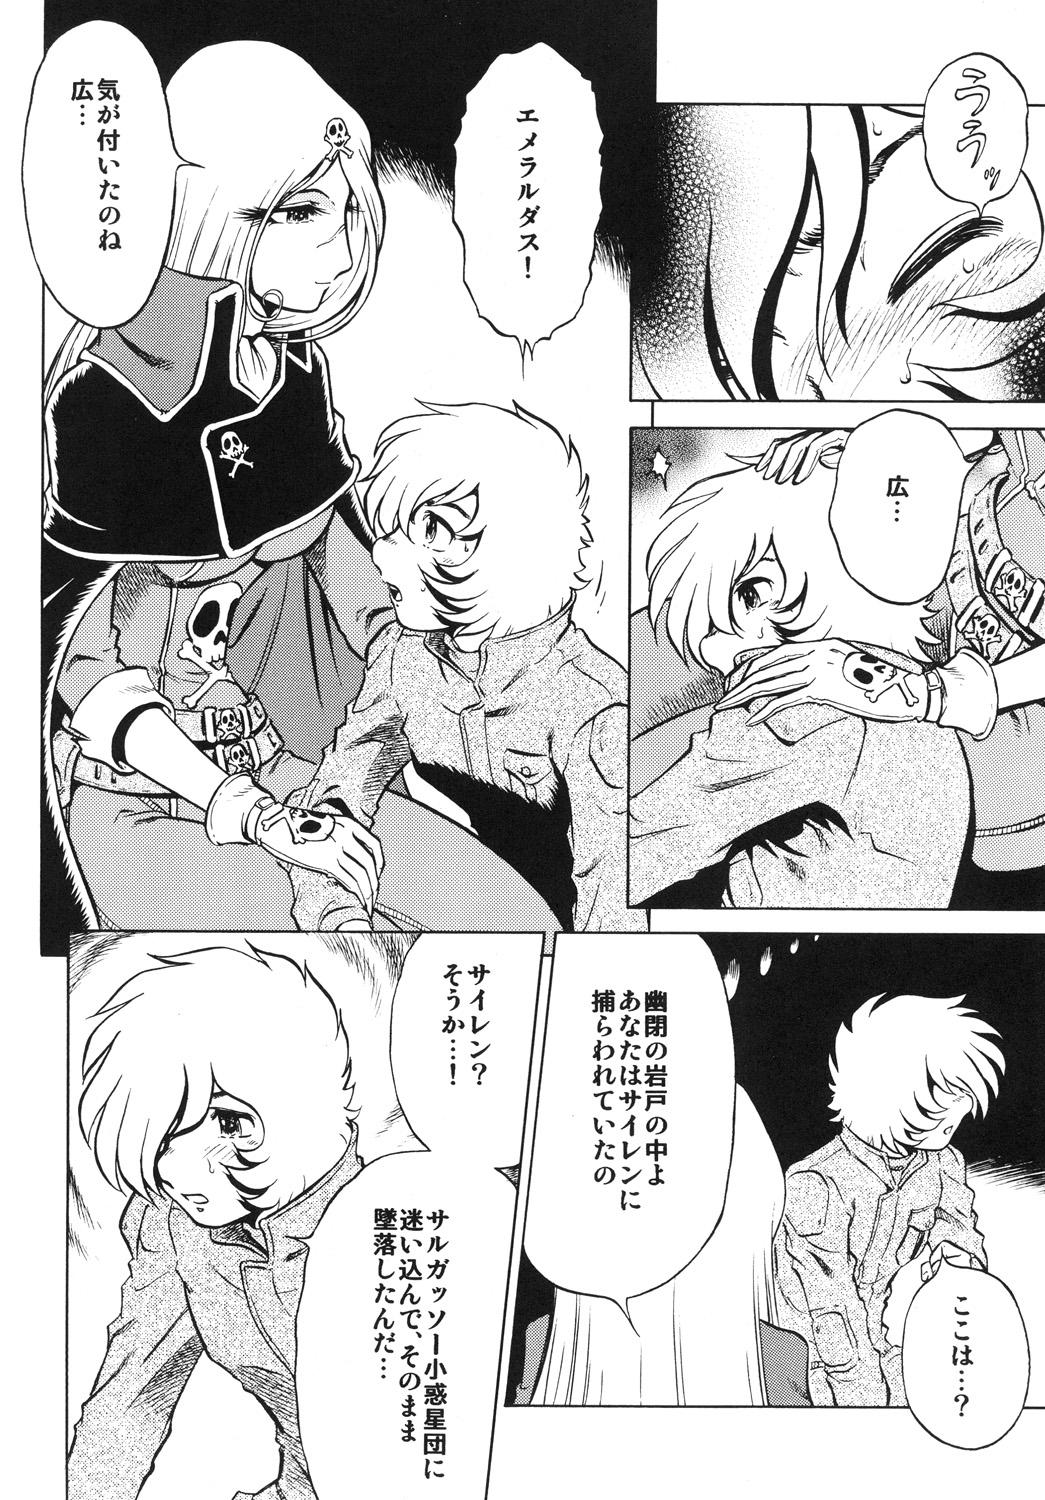 Pussy Fingering NightHead+2 - Space pirate captain harlock Playing - Page 7